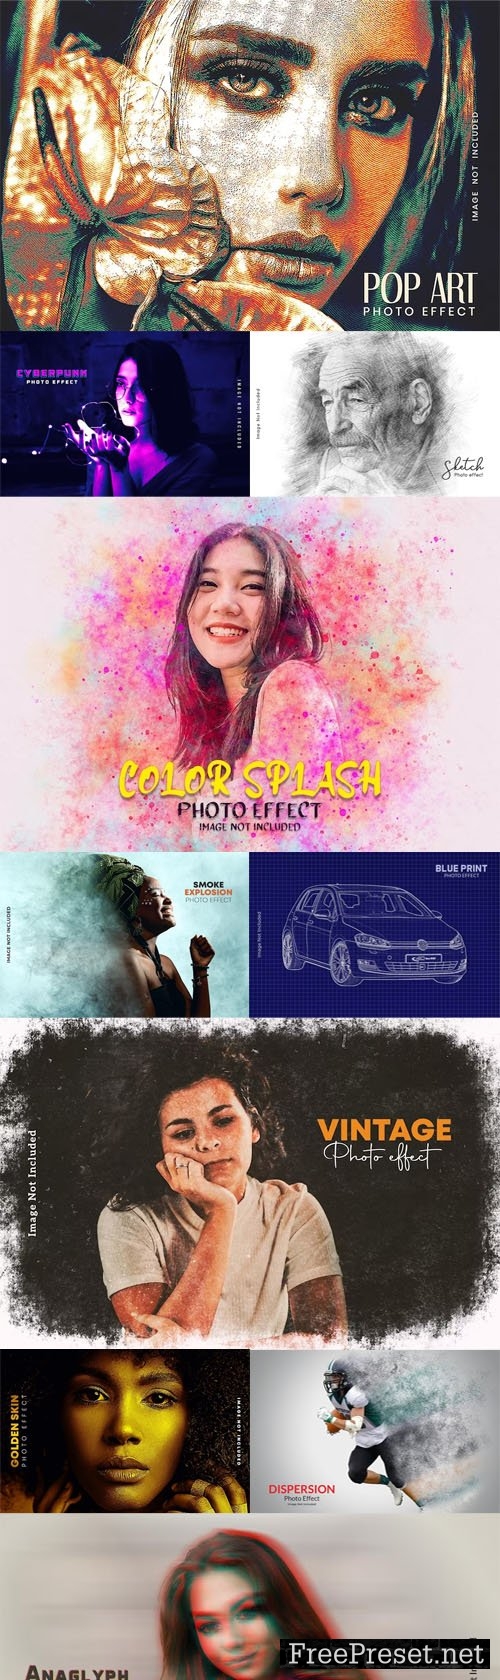 Awesome Premium Photo Effects for Photoshop [Vol.4]